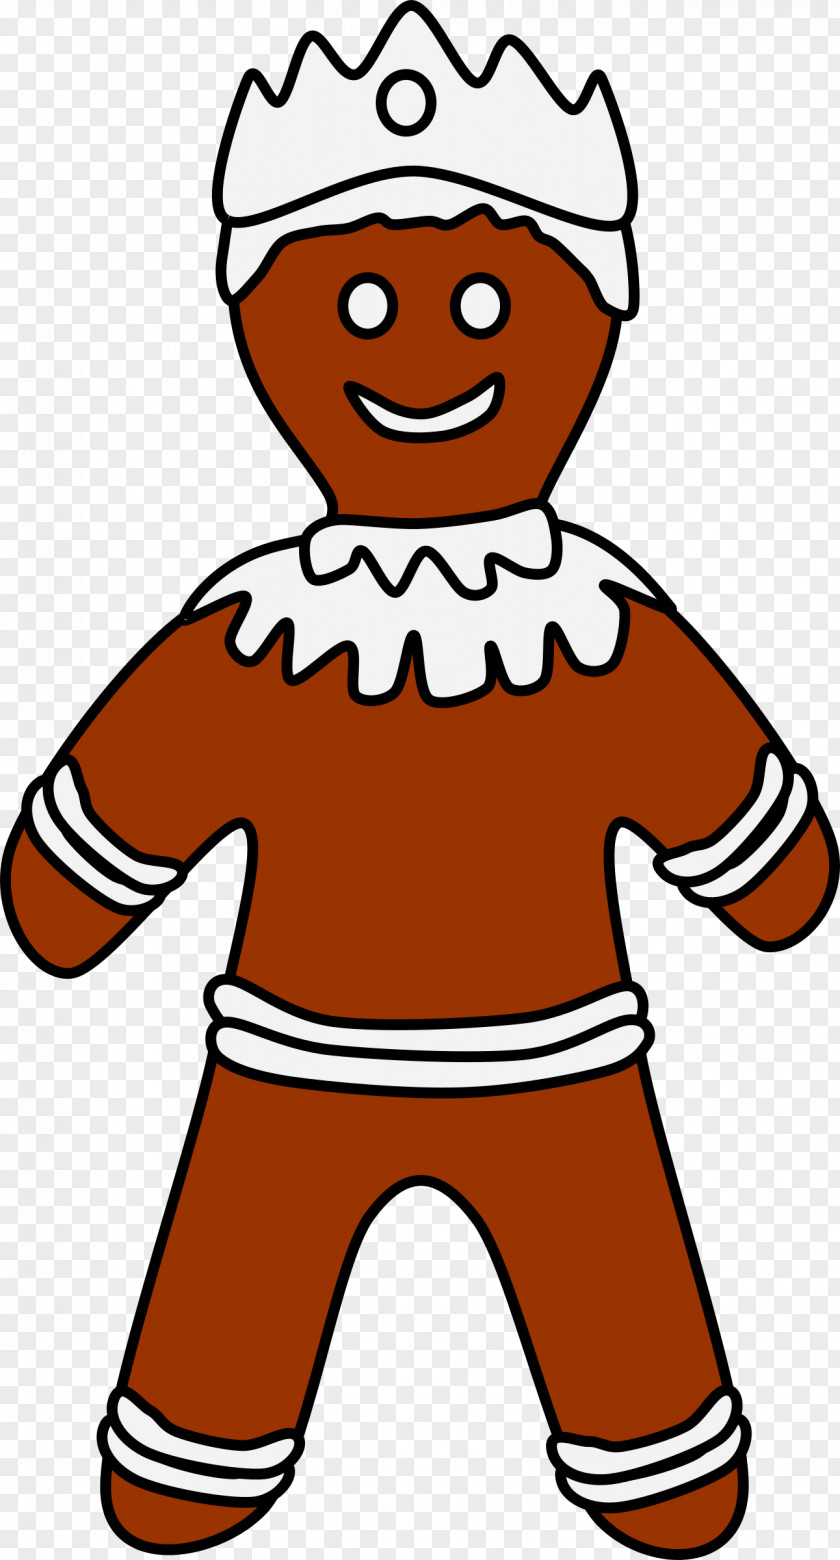 Gingerbread Man House Biscuits Clip Art PNG